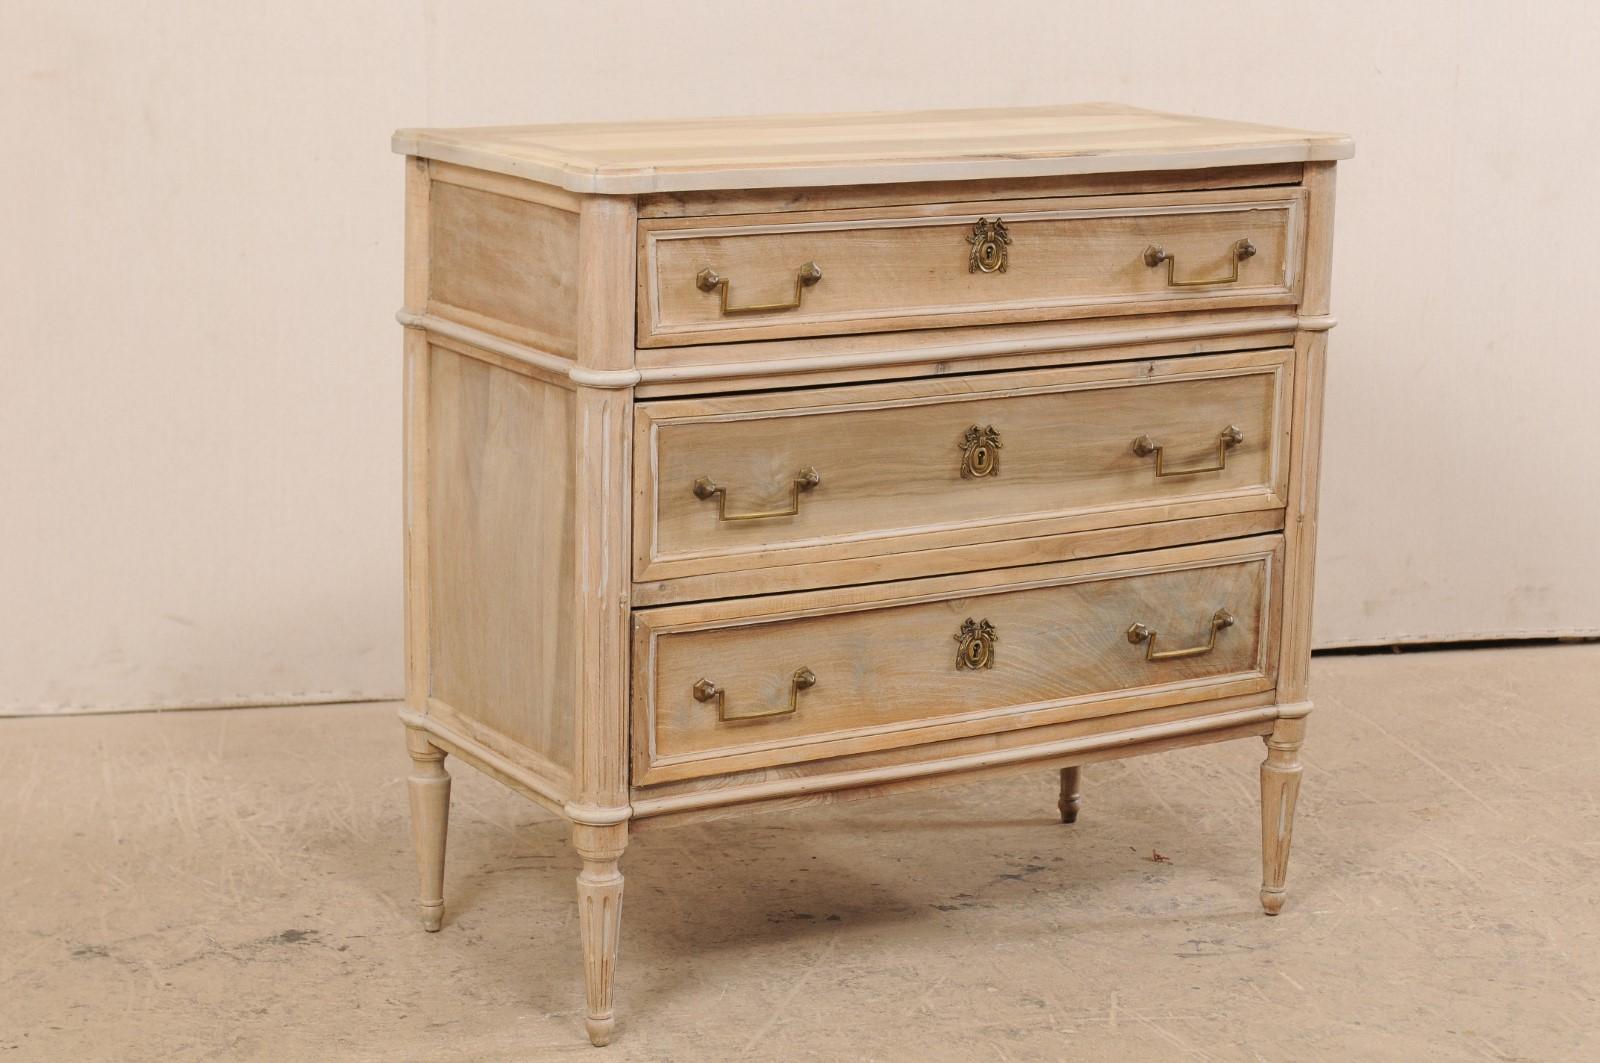 A French chest of drawers from the early 20th century. This antique chest from France features a rectangular-shaped top with pronounced and rounded corners, which rests atop a neoclassical style case with rounded and fluted front and back side